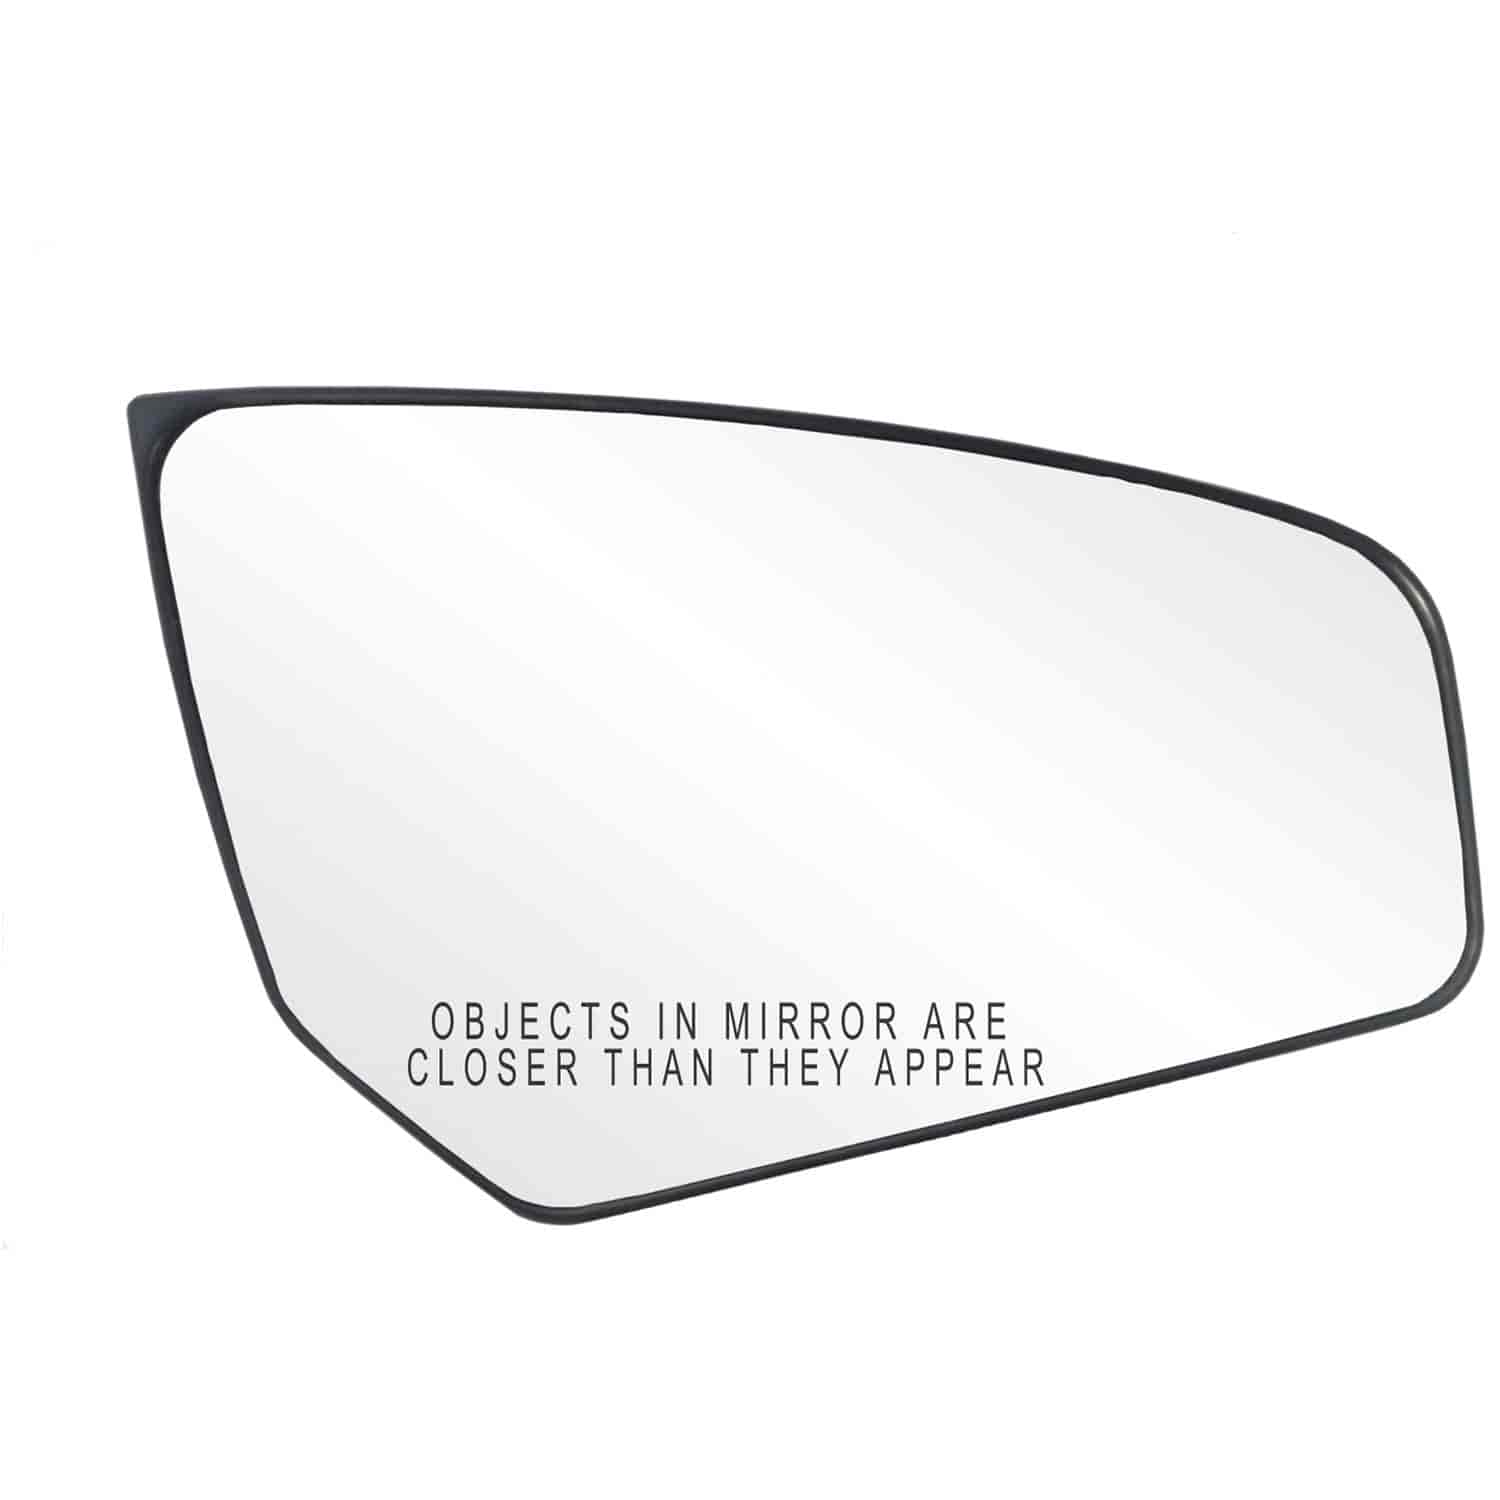 Replacement Glass Assembly for 07-12 Sentra replace your cracked or broken passenger side mirror gla